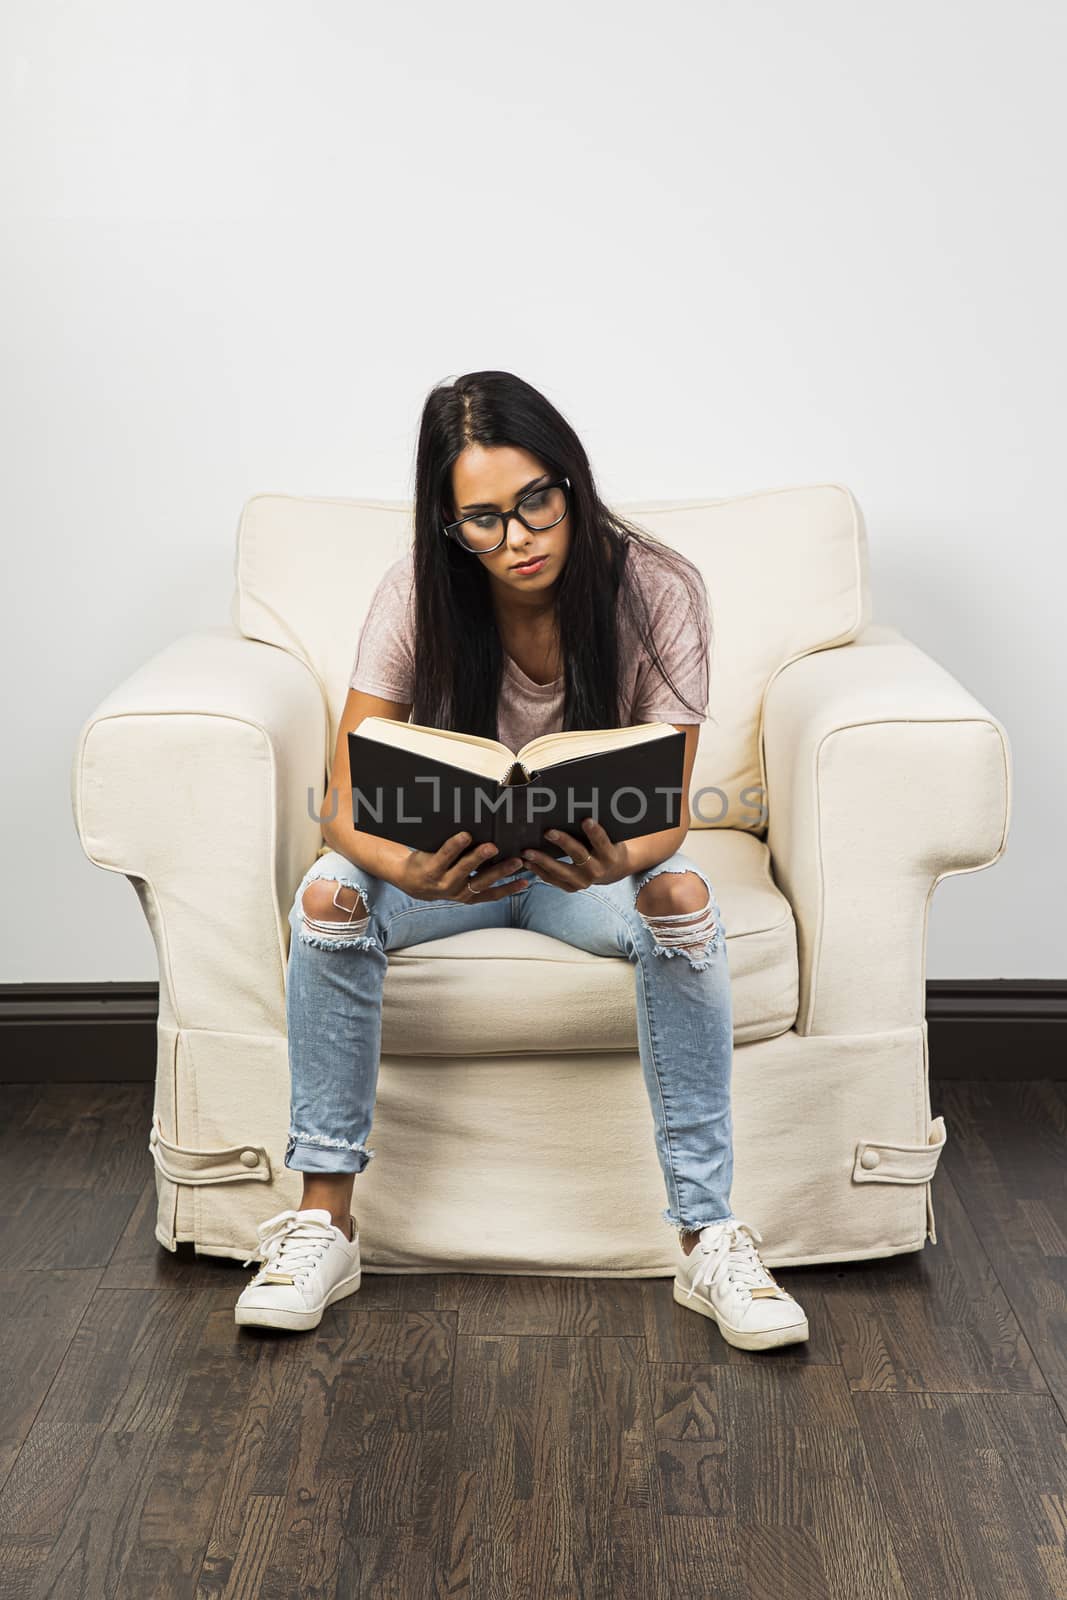 Twenty something woman wearing glasses, sitting on a couch, reading a hard cover book